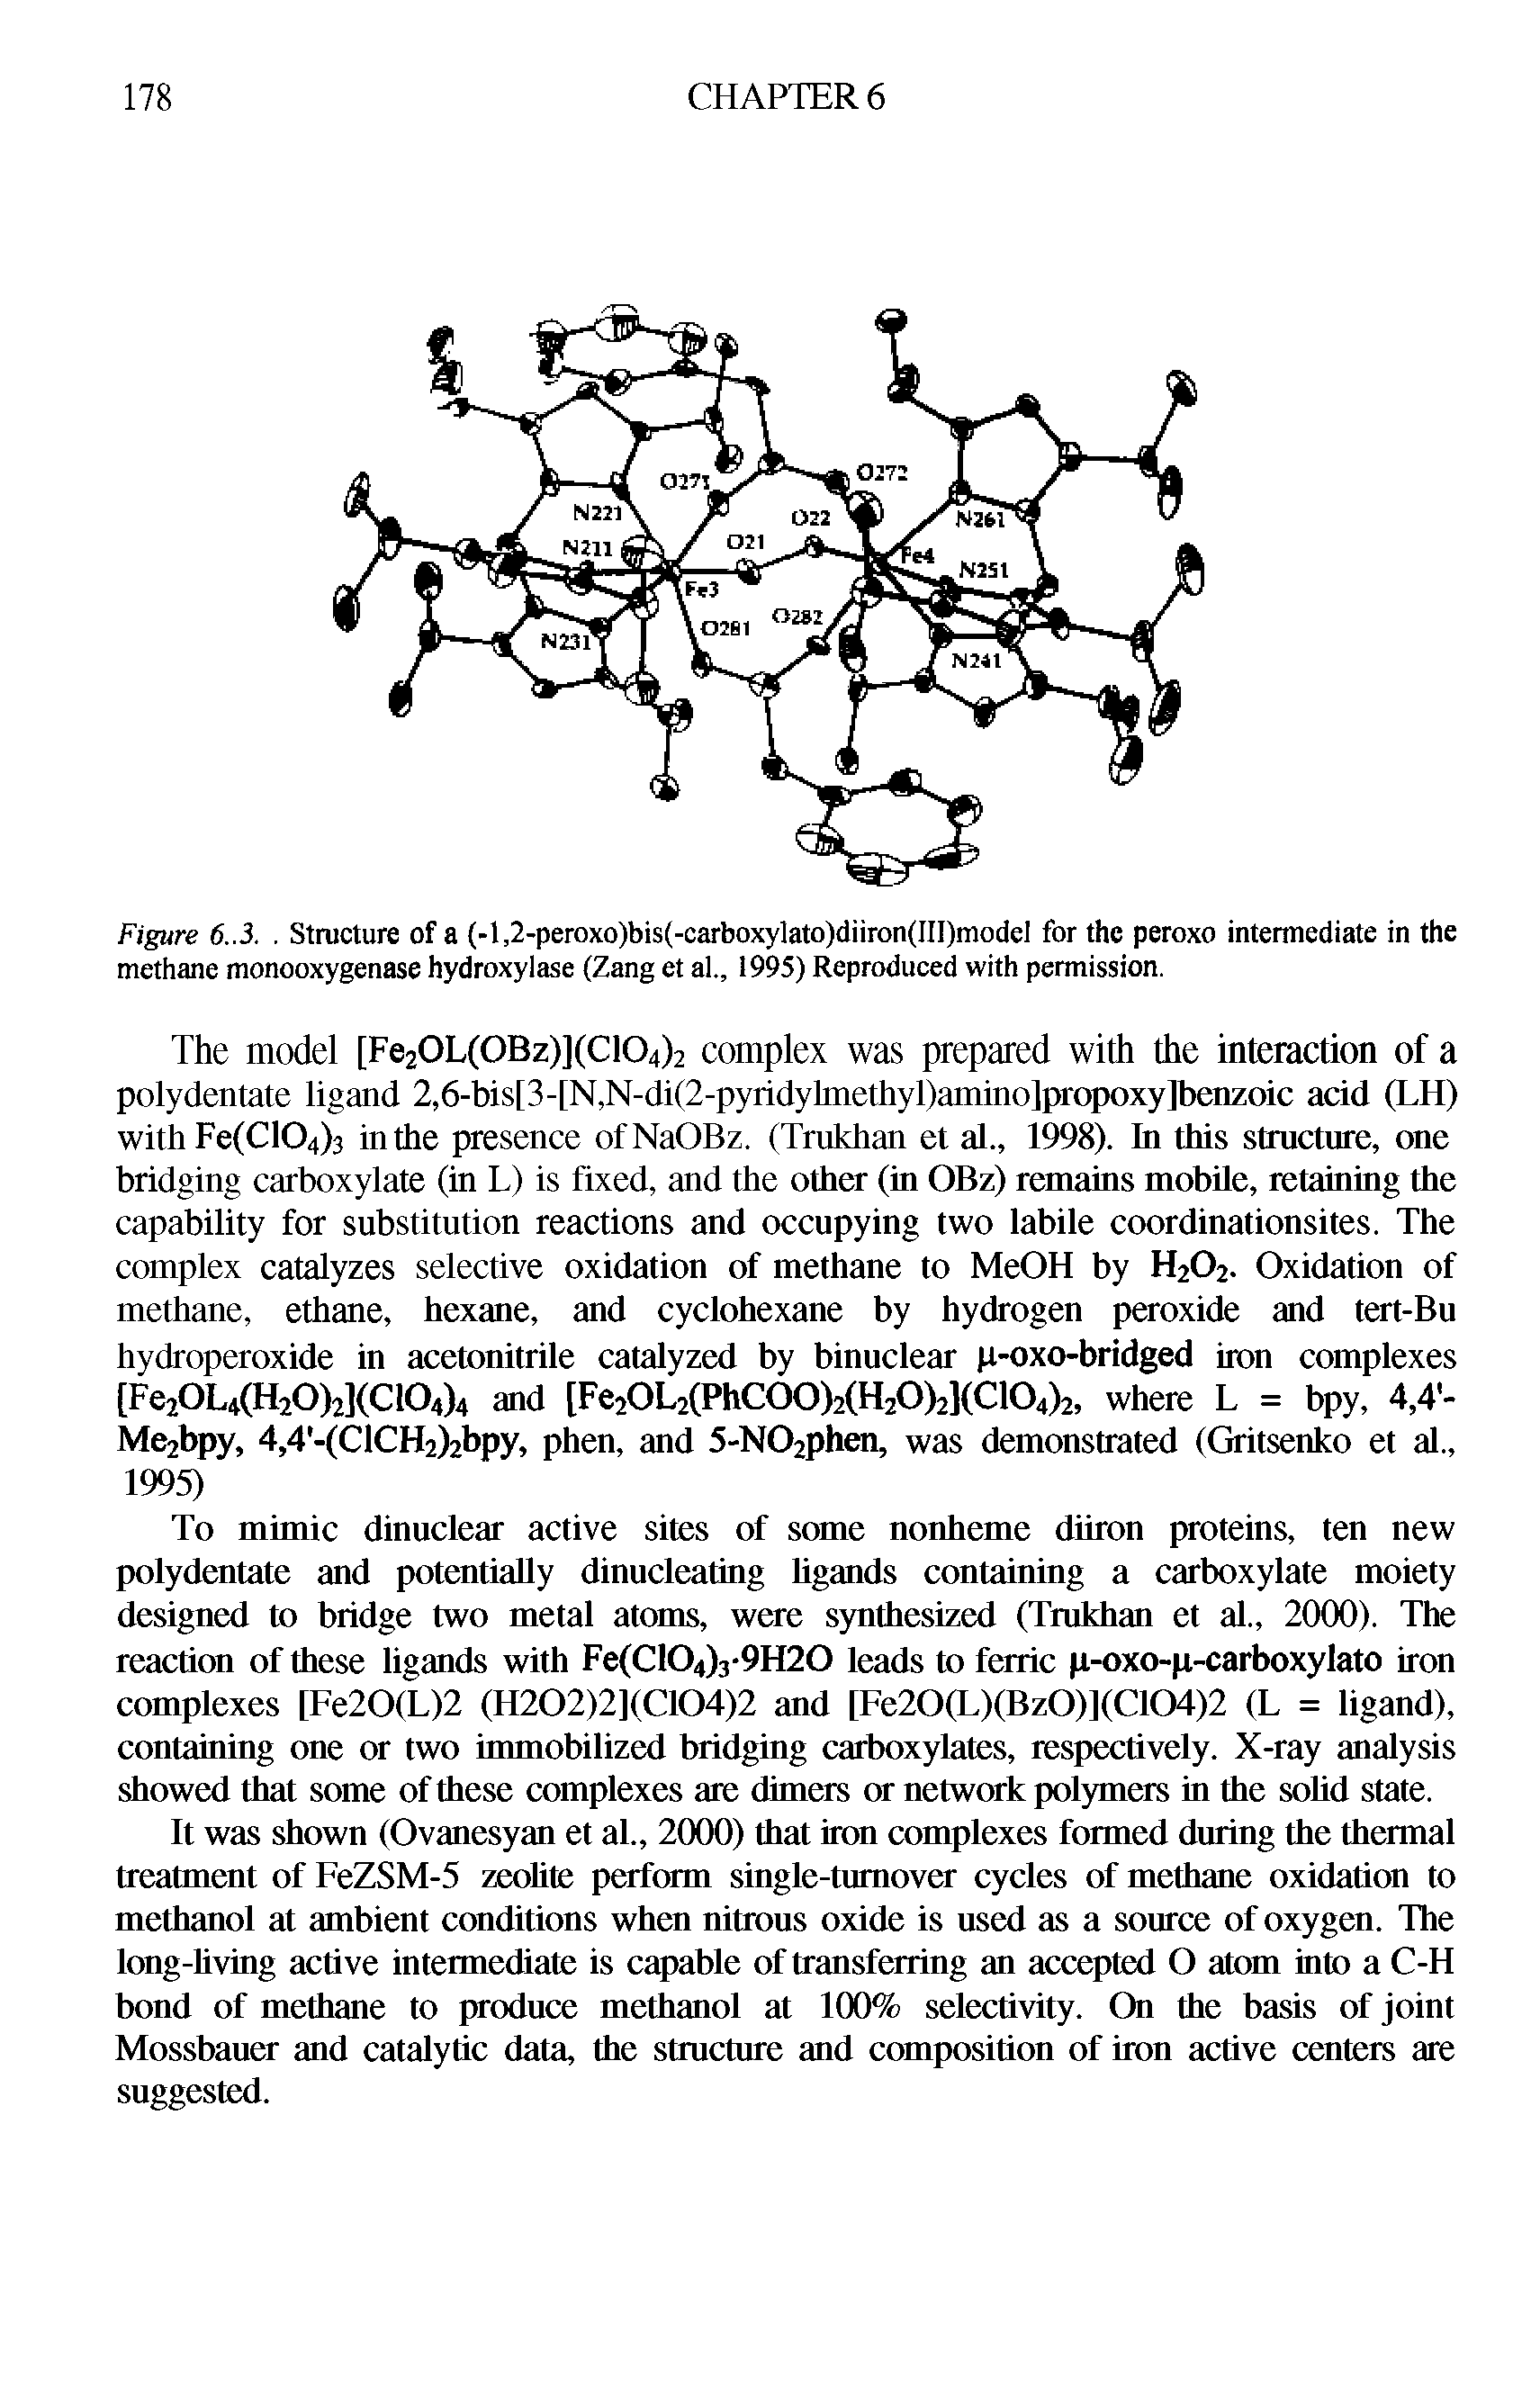 Figure 6..3.. Structure of a (-l,2-peroxo)bis(-carboxylato)diiron(III)model for the peroxo intermediate in the methane monooxygenase hydroxylase (Zang et al., 1995) Reproduced with permission.